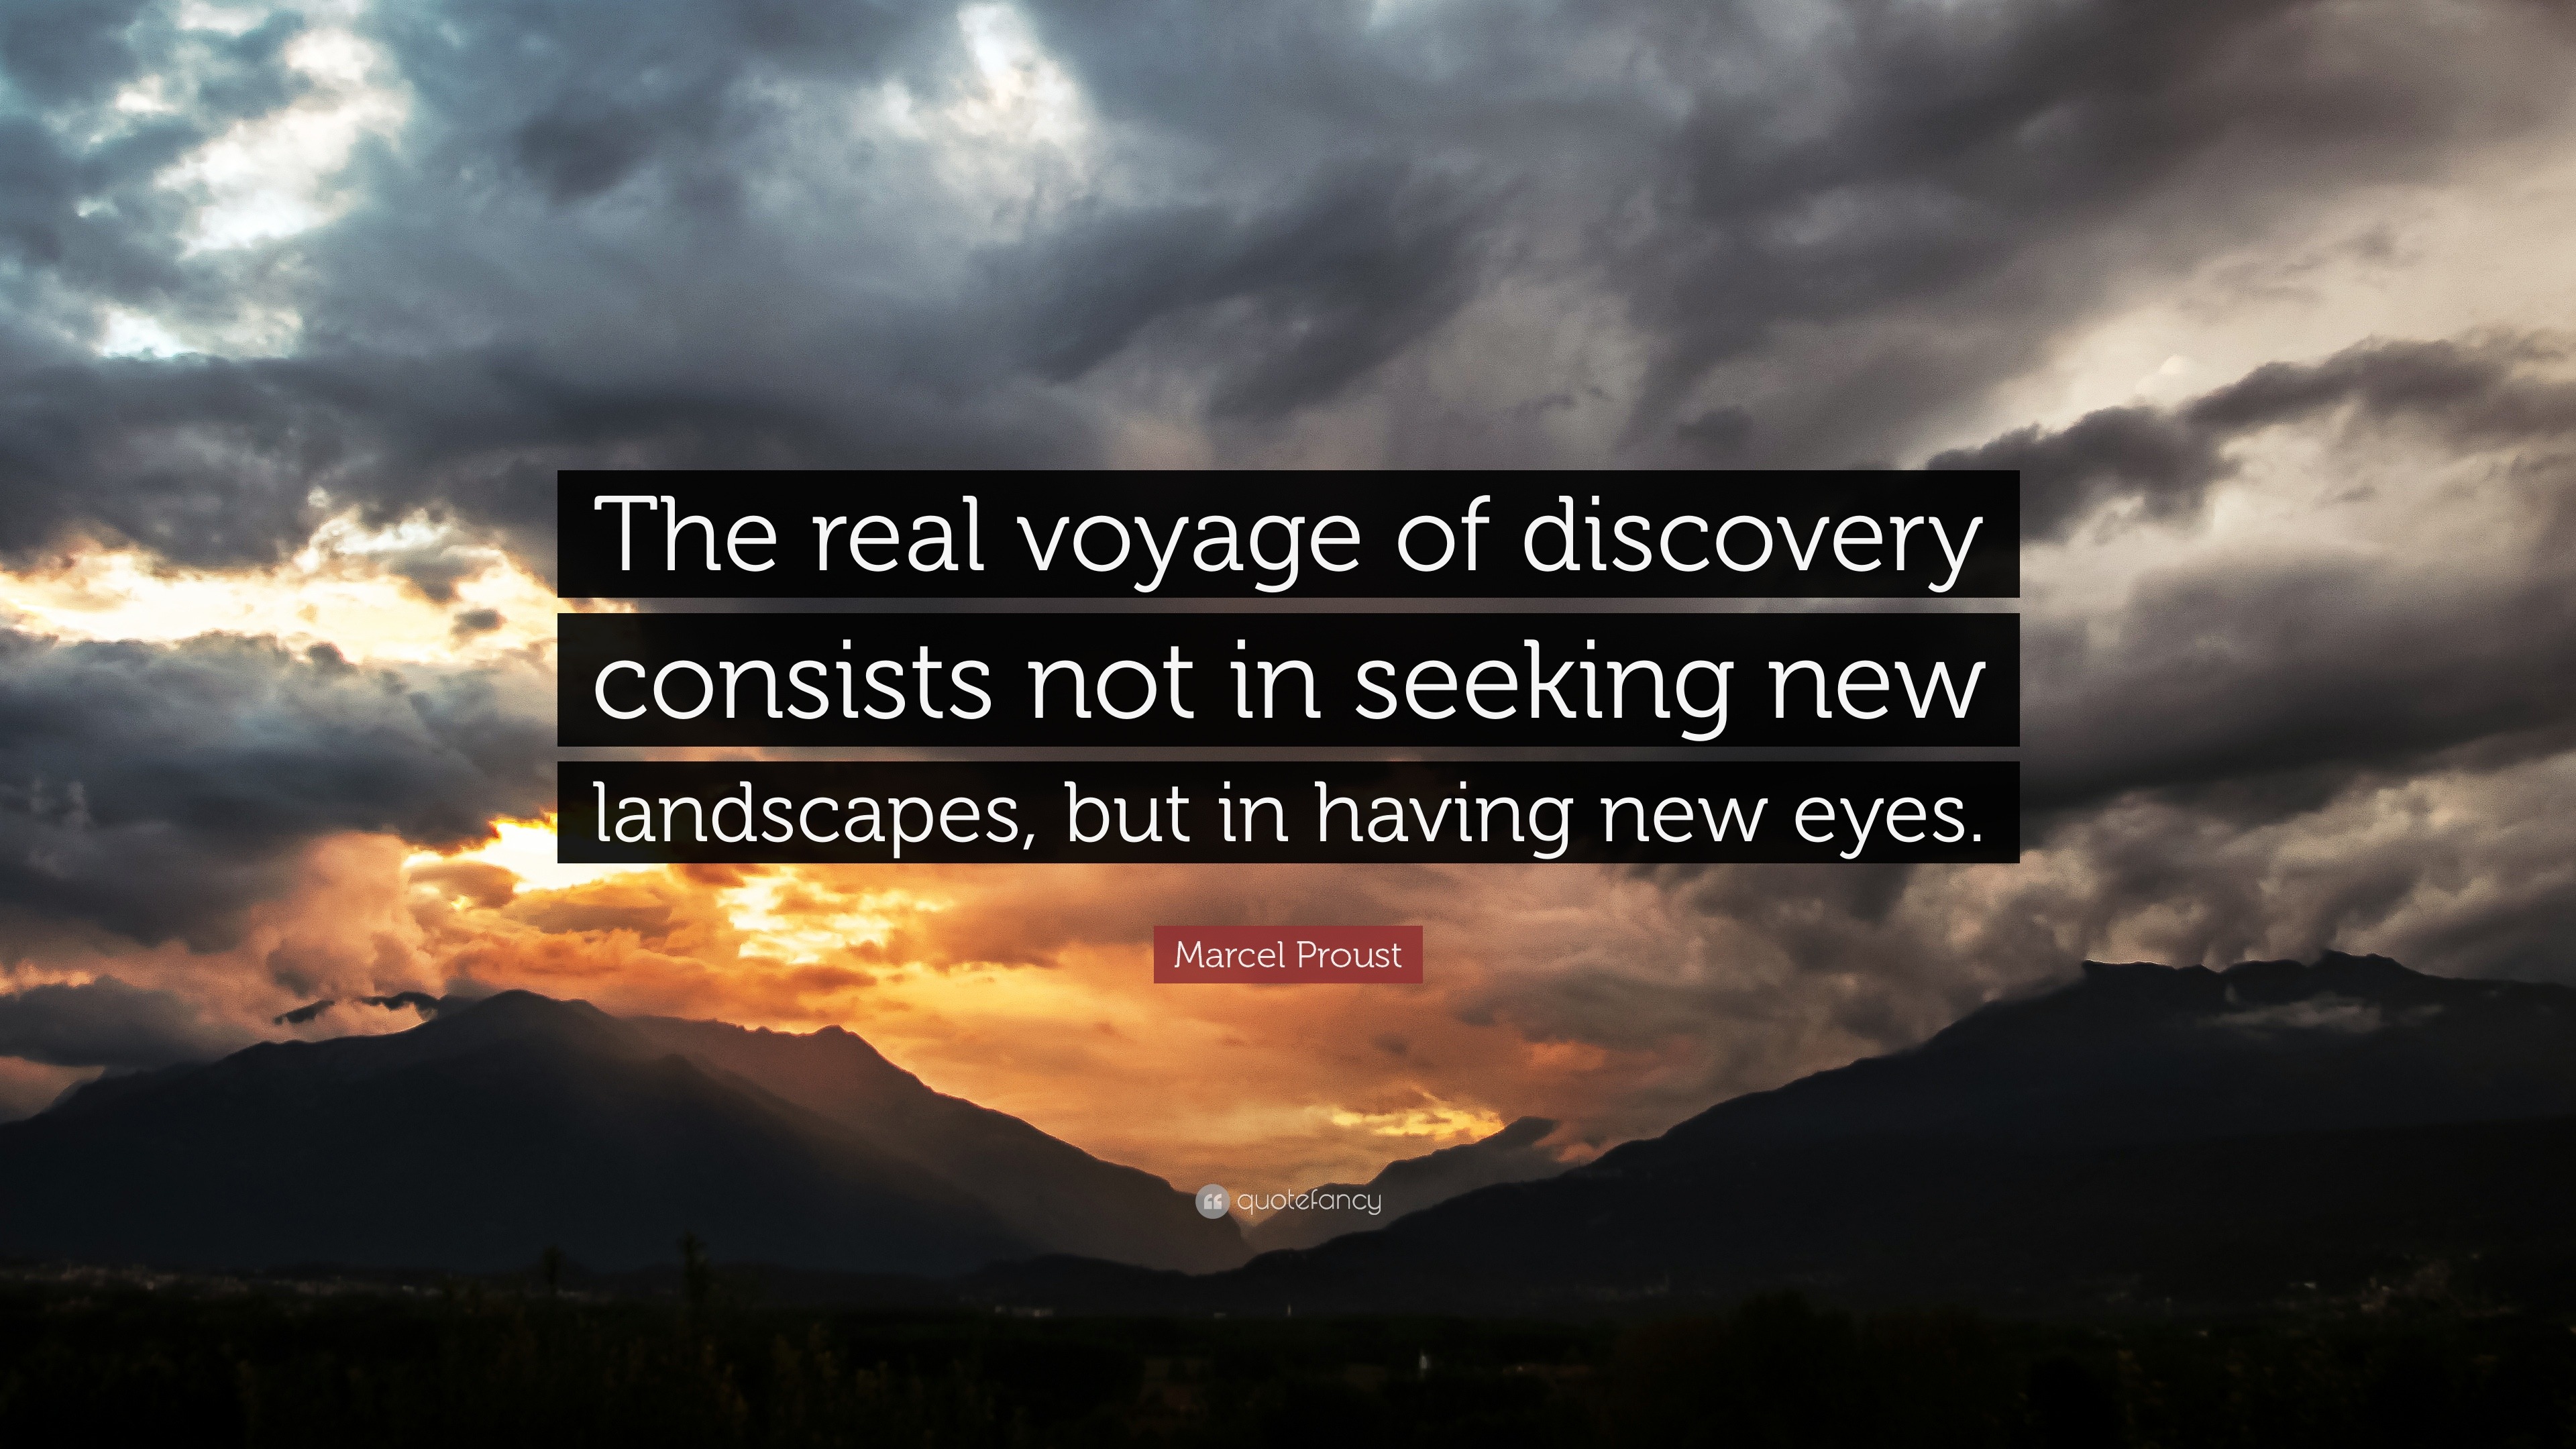 the real voyage of discovery quote meaning